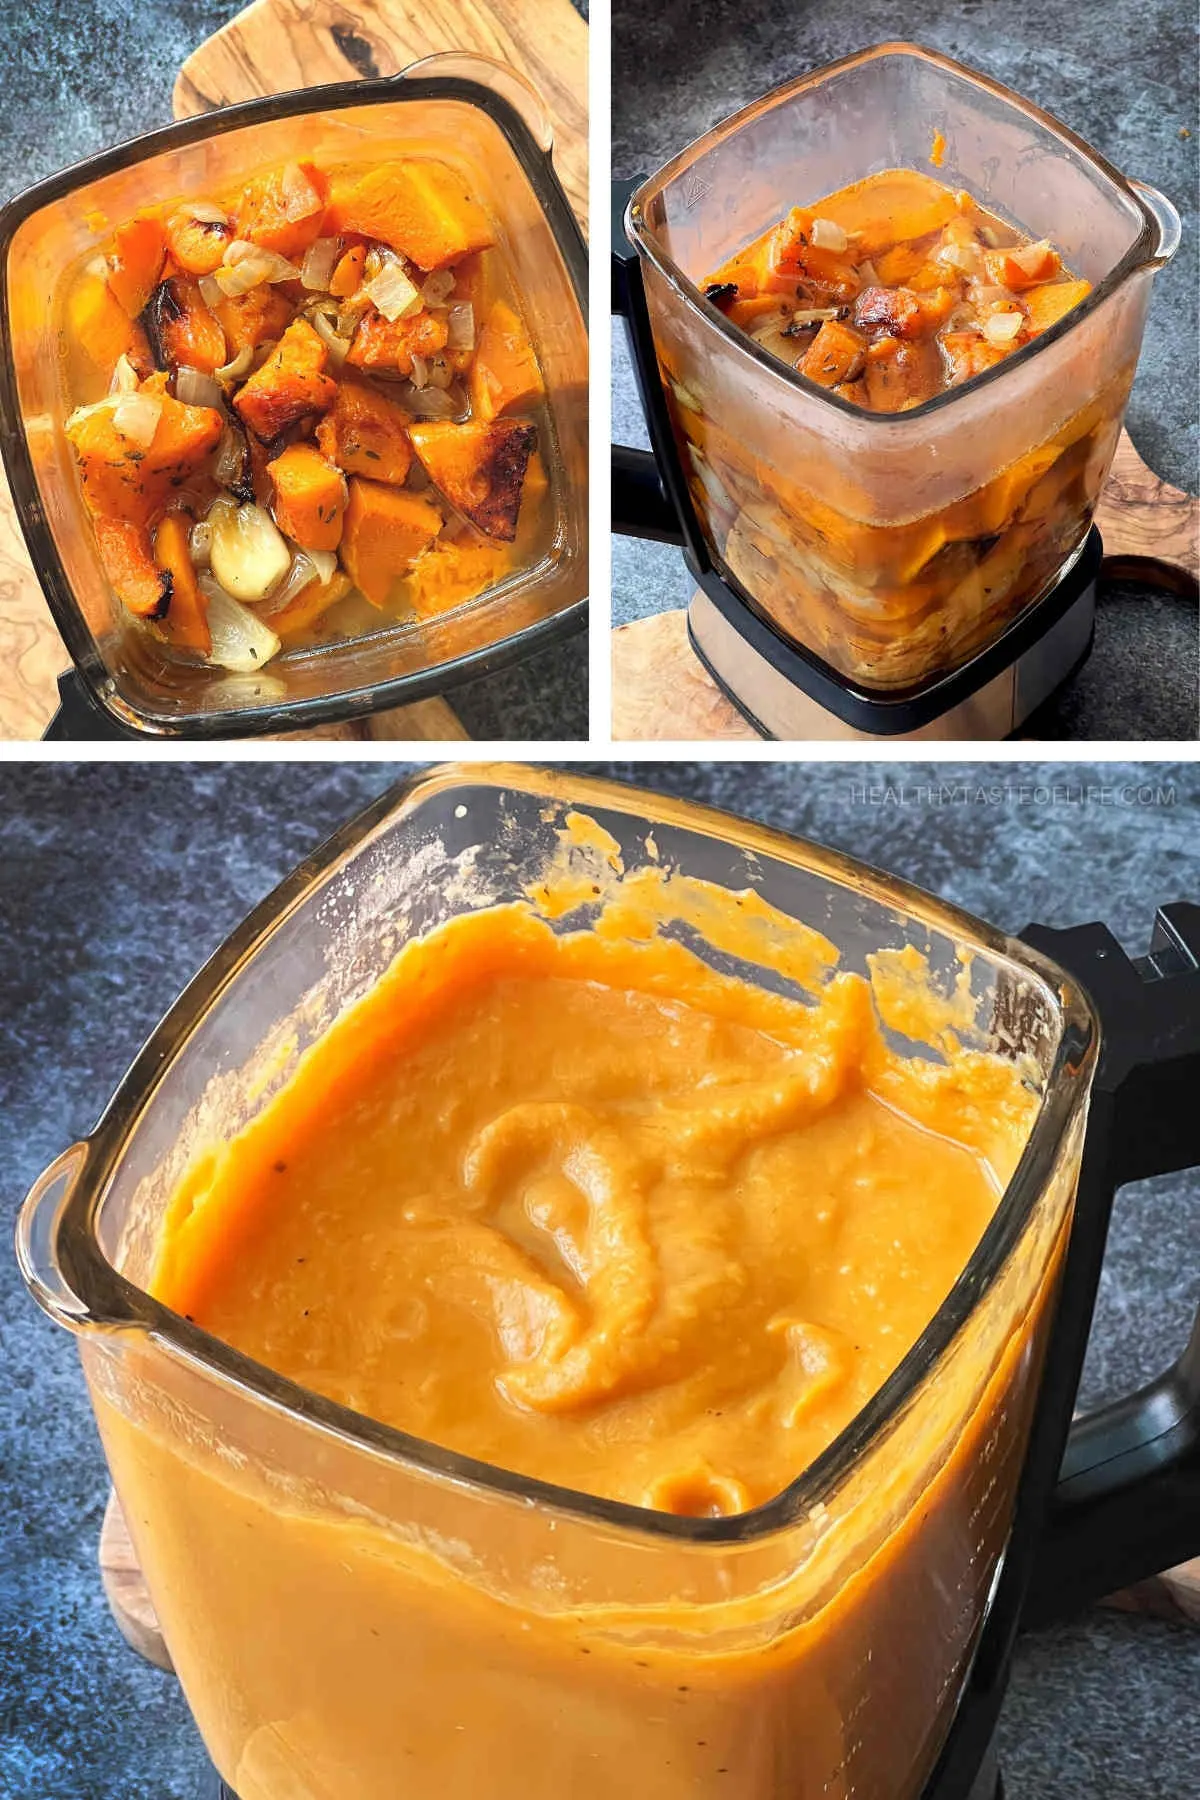 Process shots showing how to blend the buuternut squash carrot and celery root until getting a creamy soup like consistency.